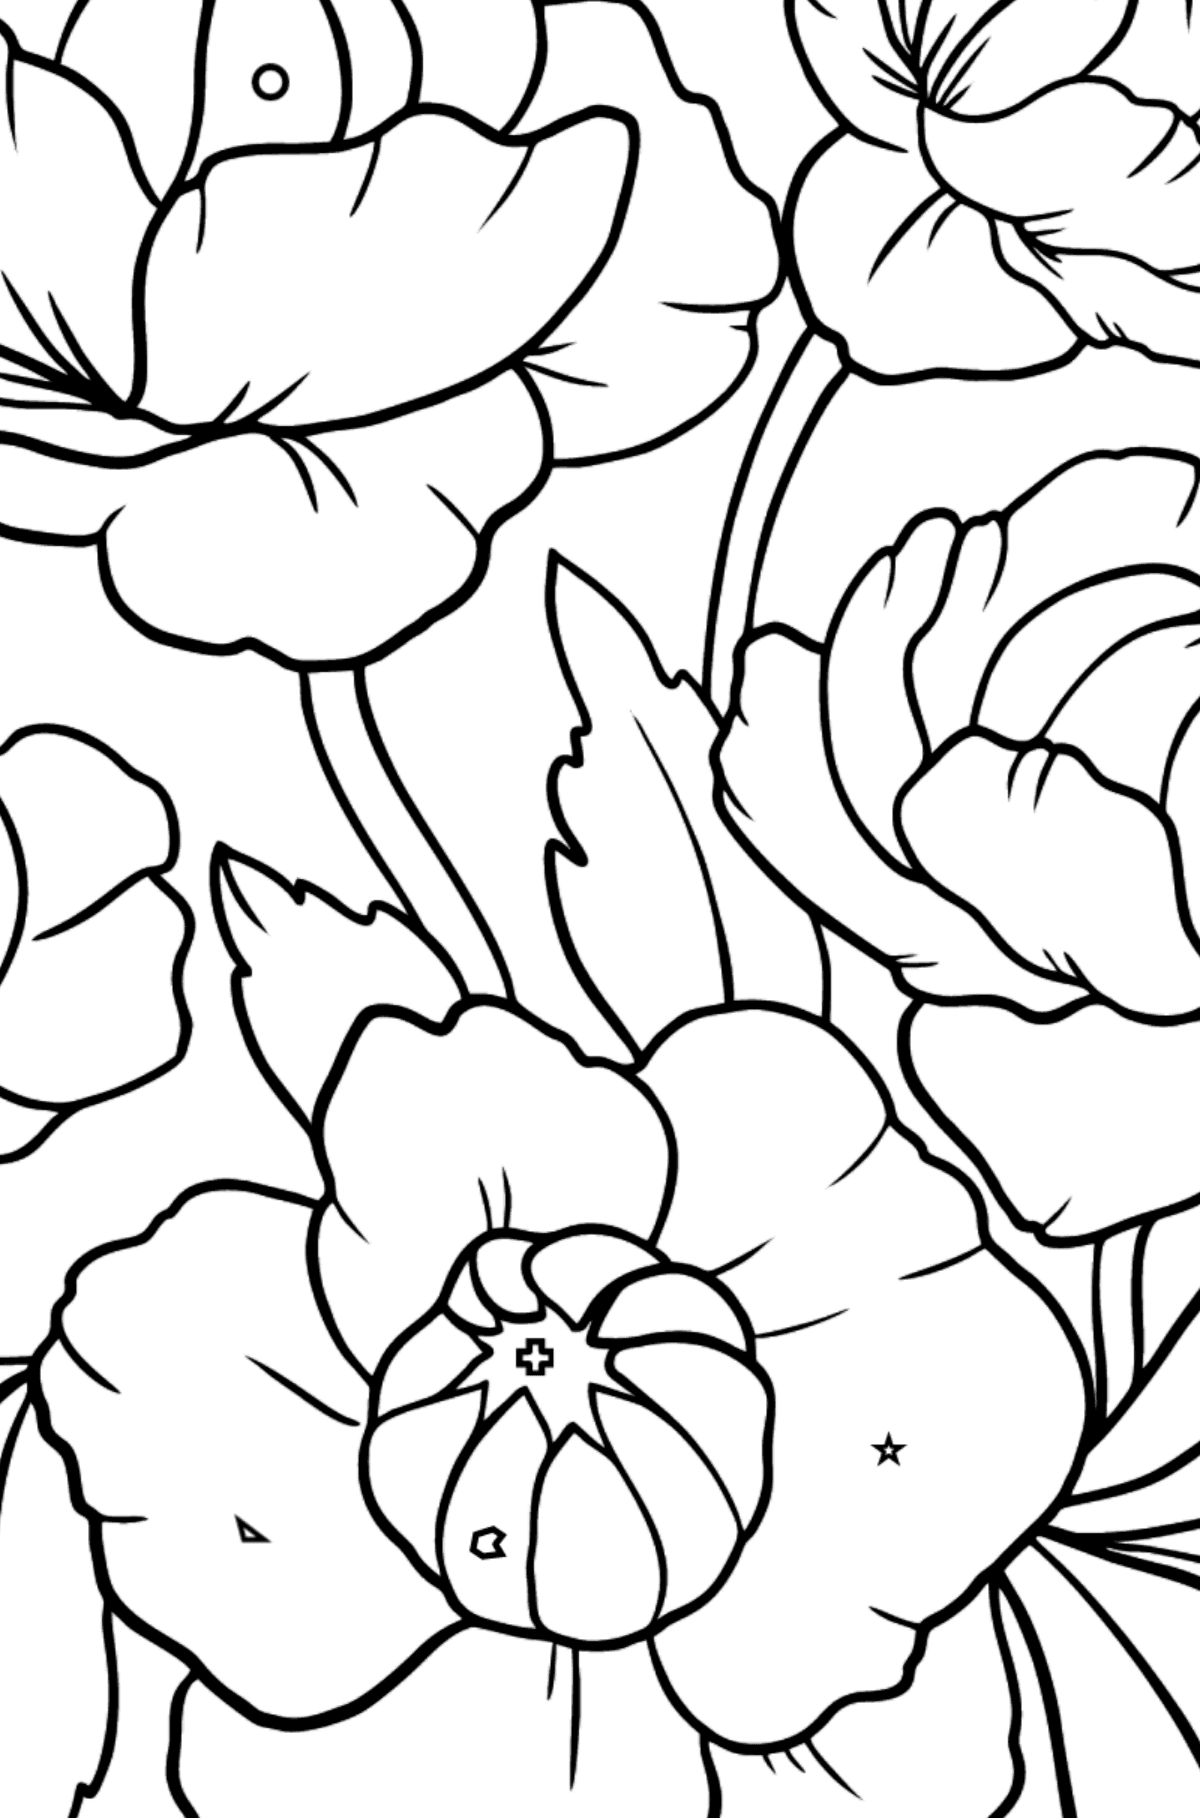 Beautiful Flower Coloring Page - A Red and Pink Globeflower - Coloring by Geometric Shapes for Kids